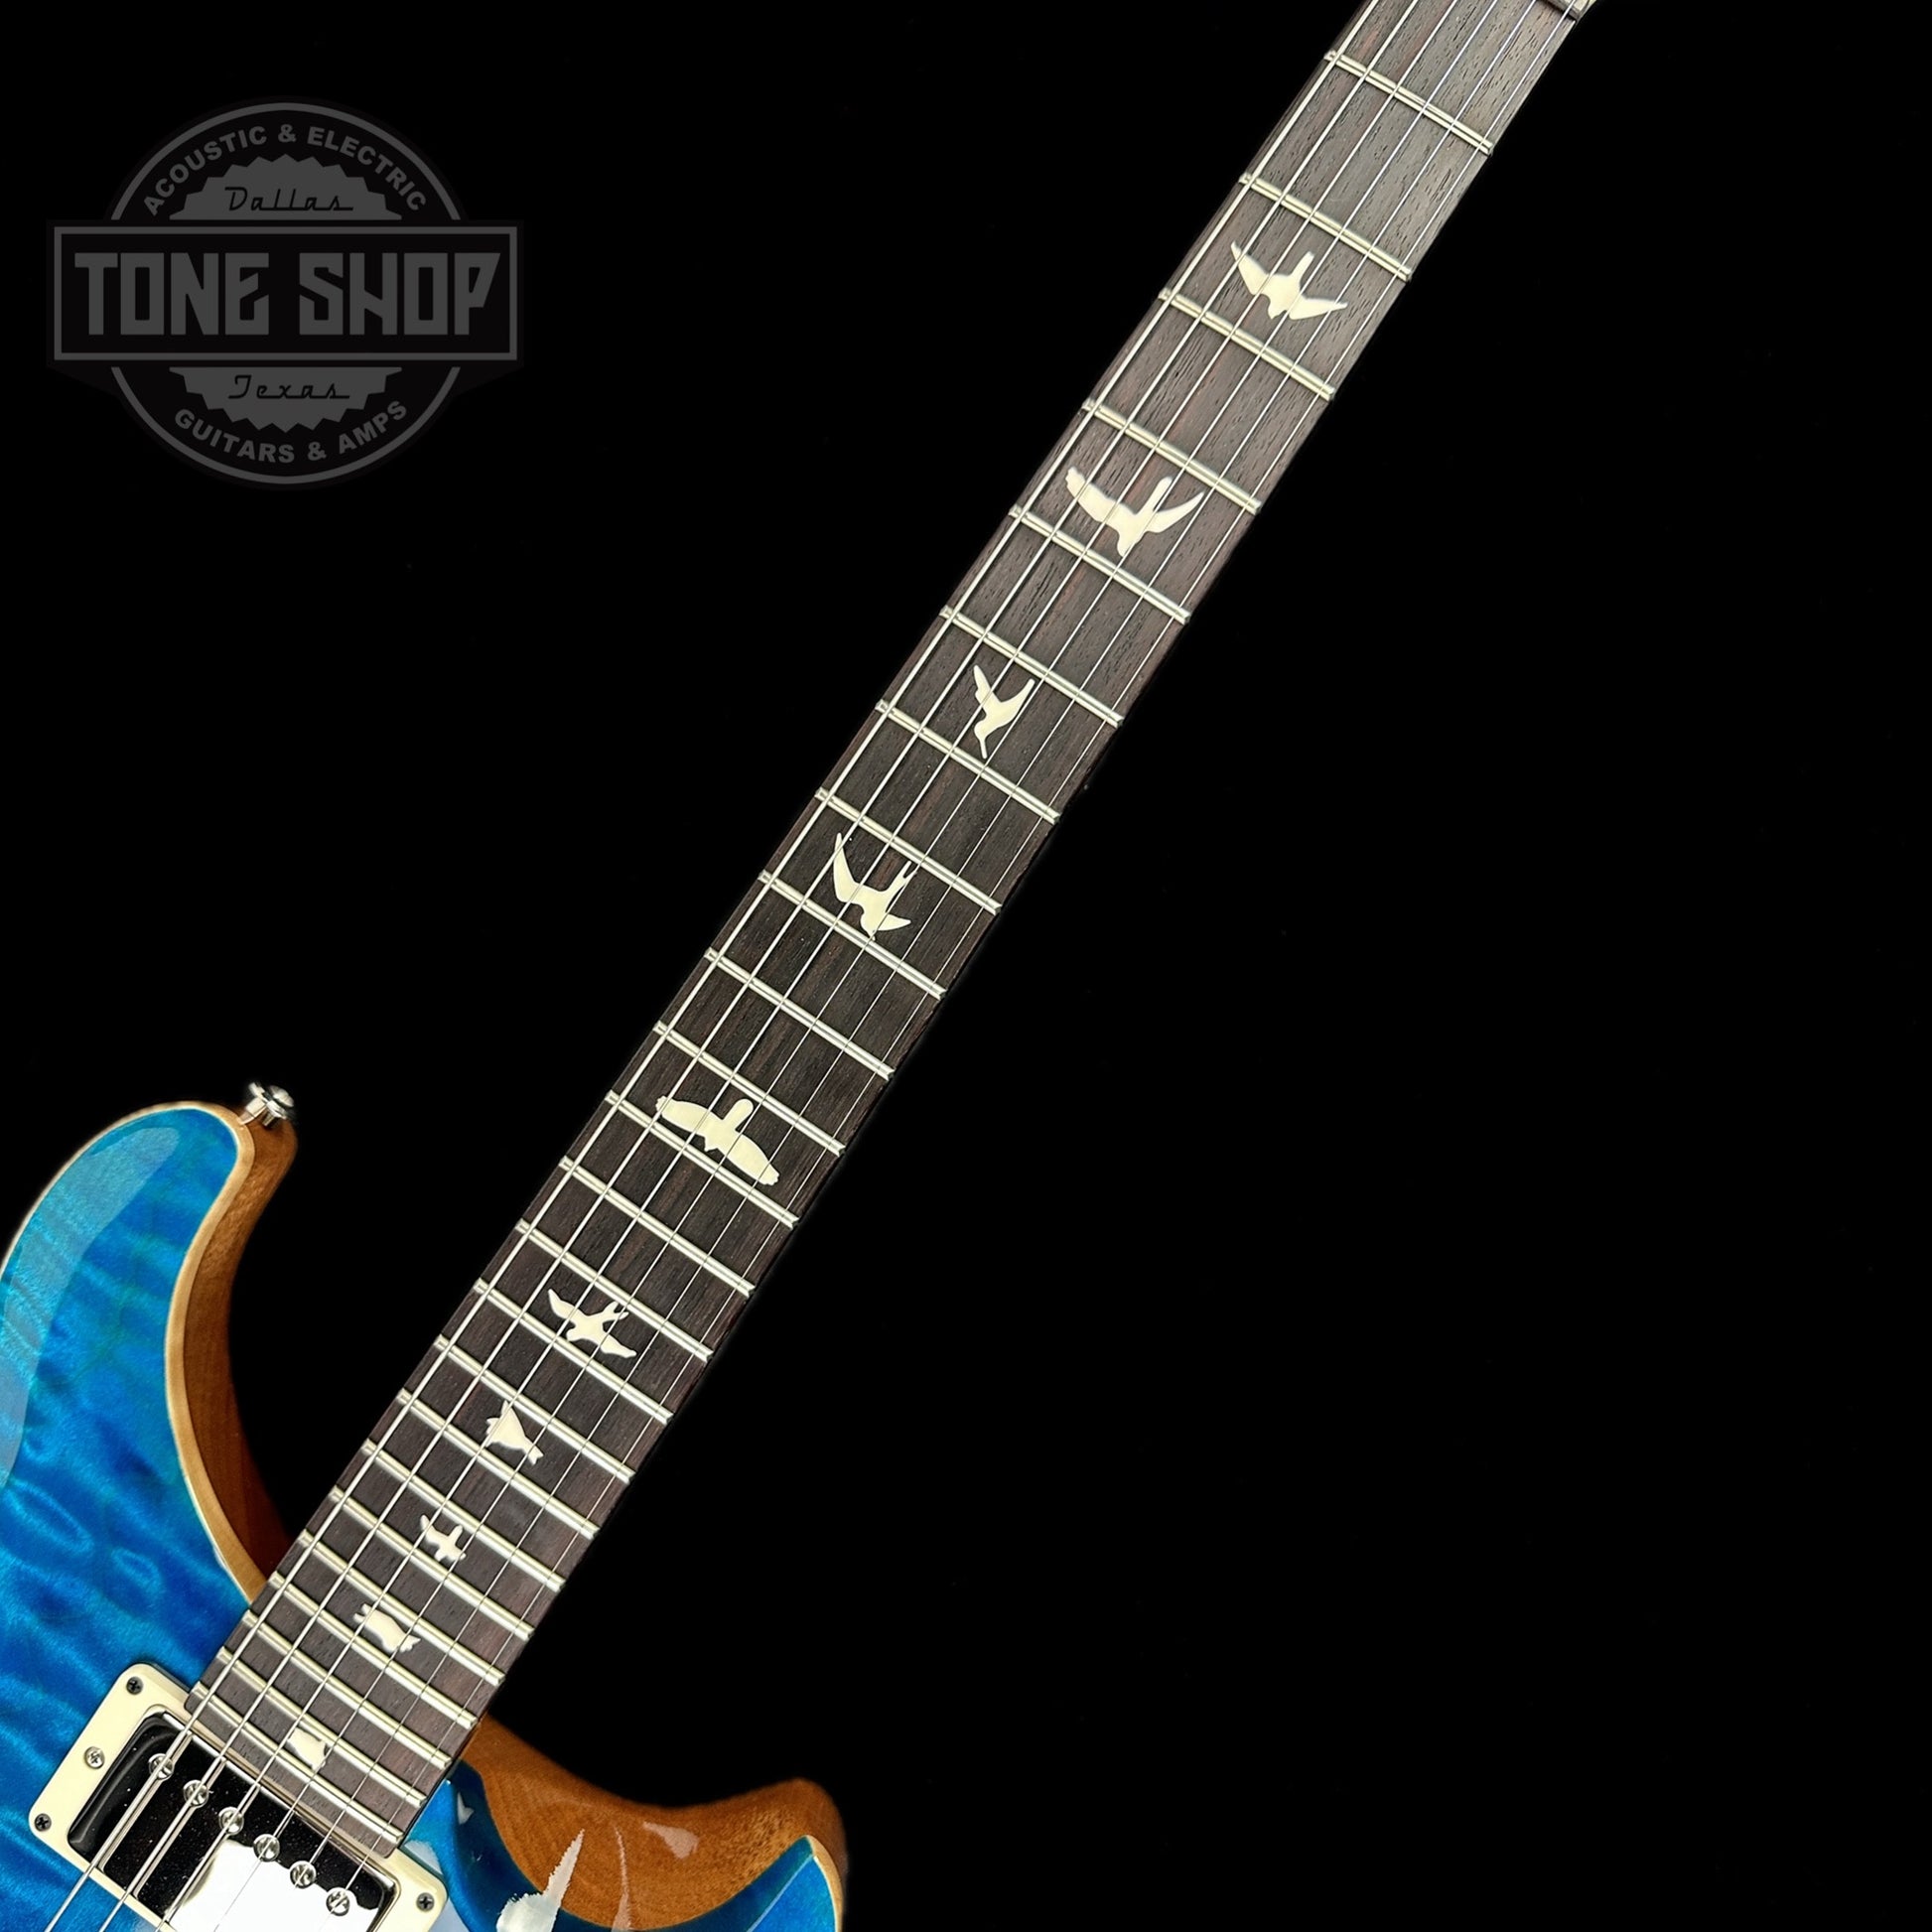 Fretboard of PRS Paul Reed Smith CE24 Semi-Hollow Quilt Blue Matteo.